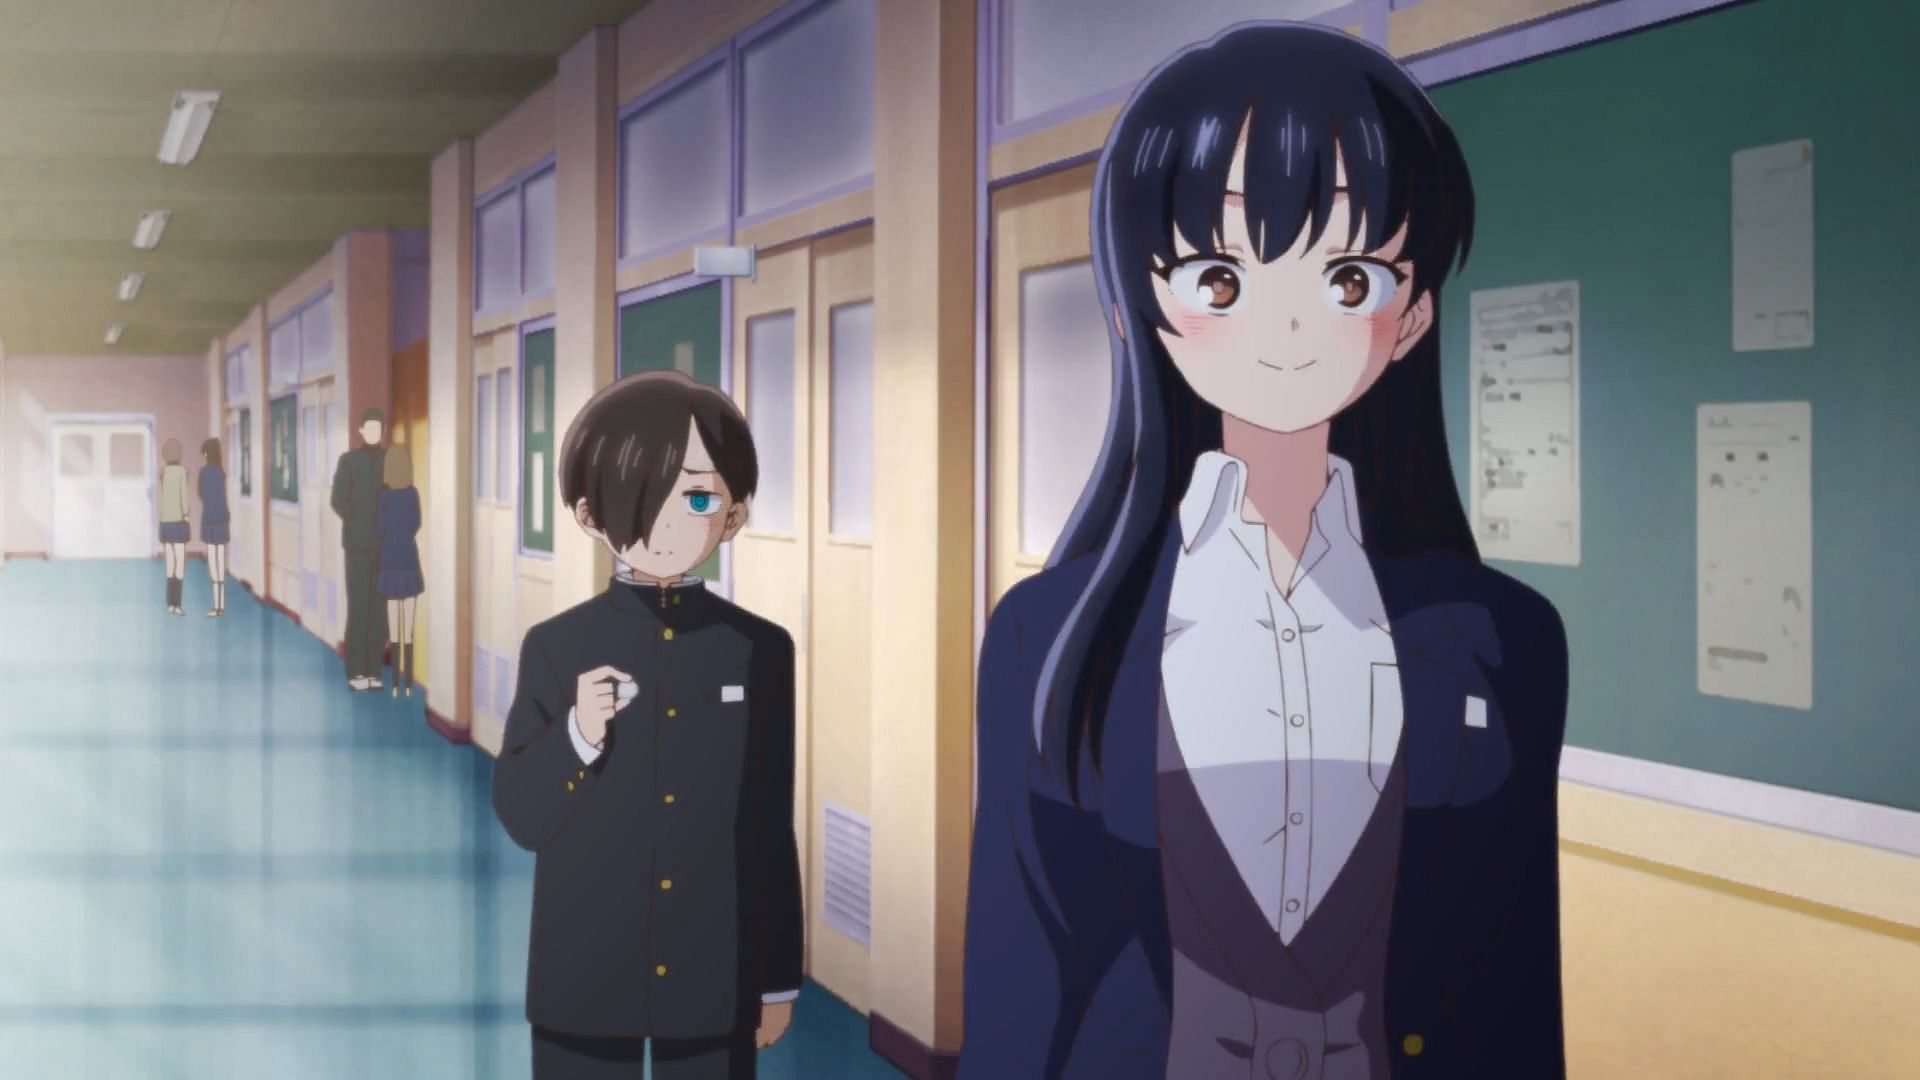 The Dangers in My Heart TV Anime Shows Anna's Charm in Creditless